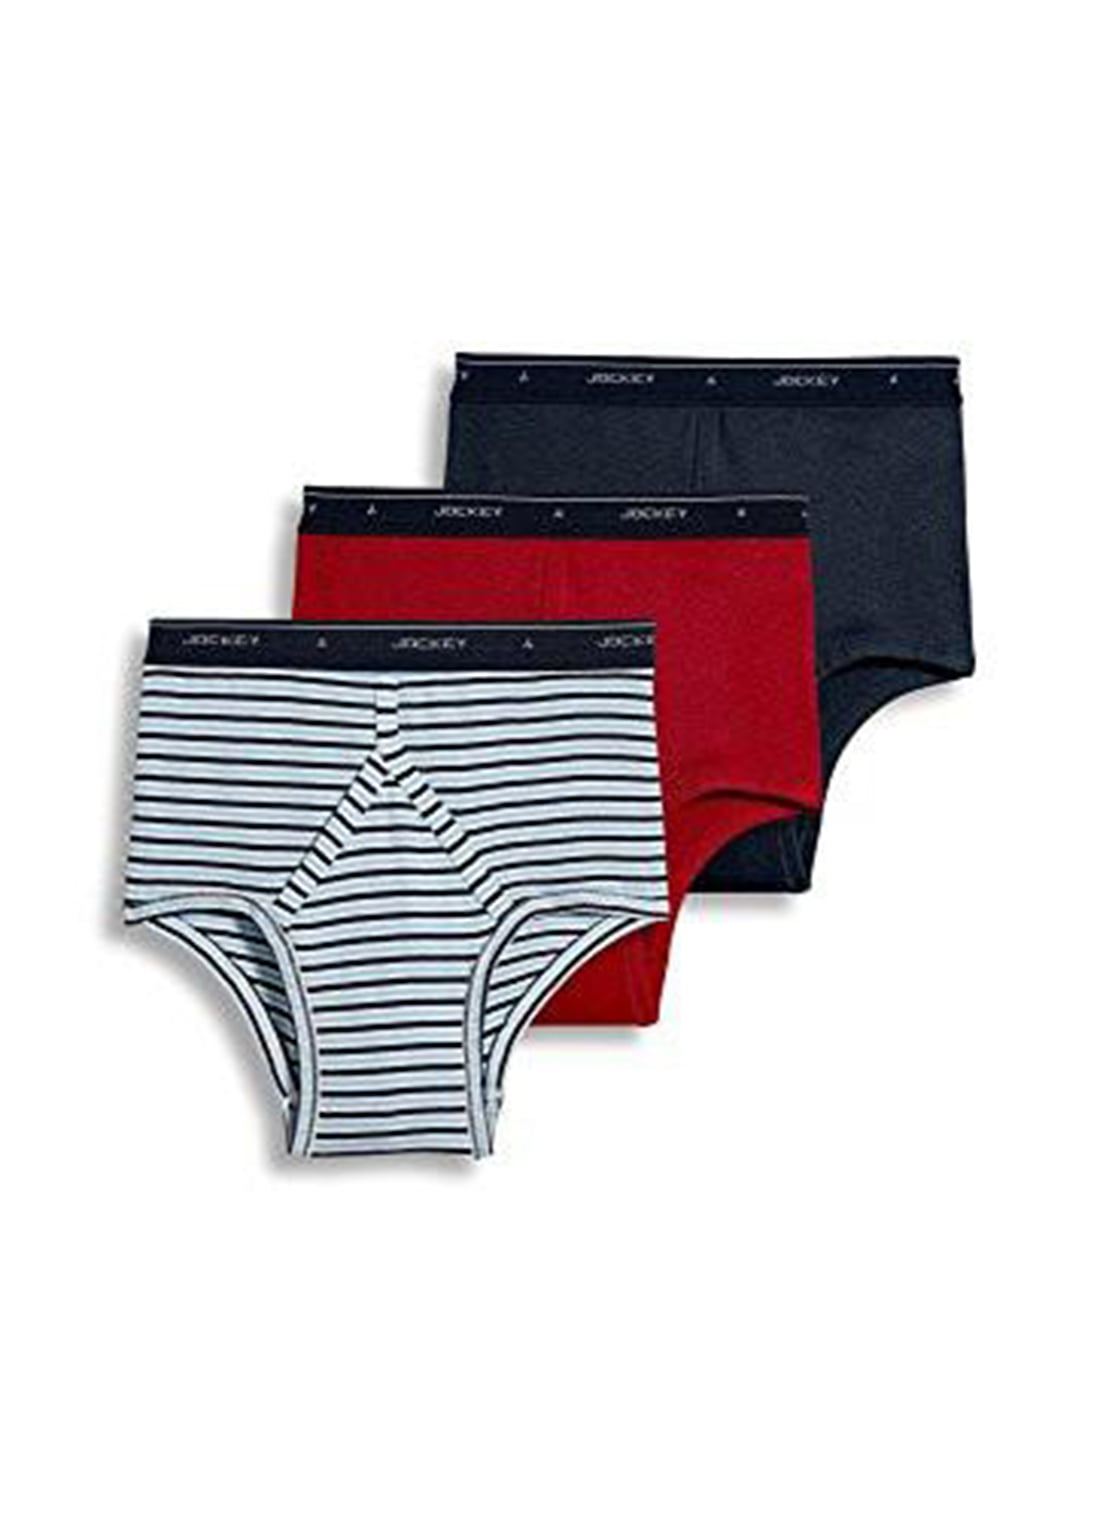 Jockey Men's Classic Collection Full-Rise Briefs 4-Pack Underwear ...